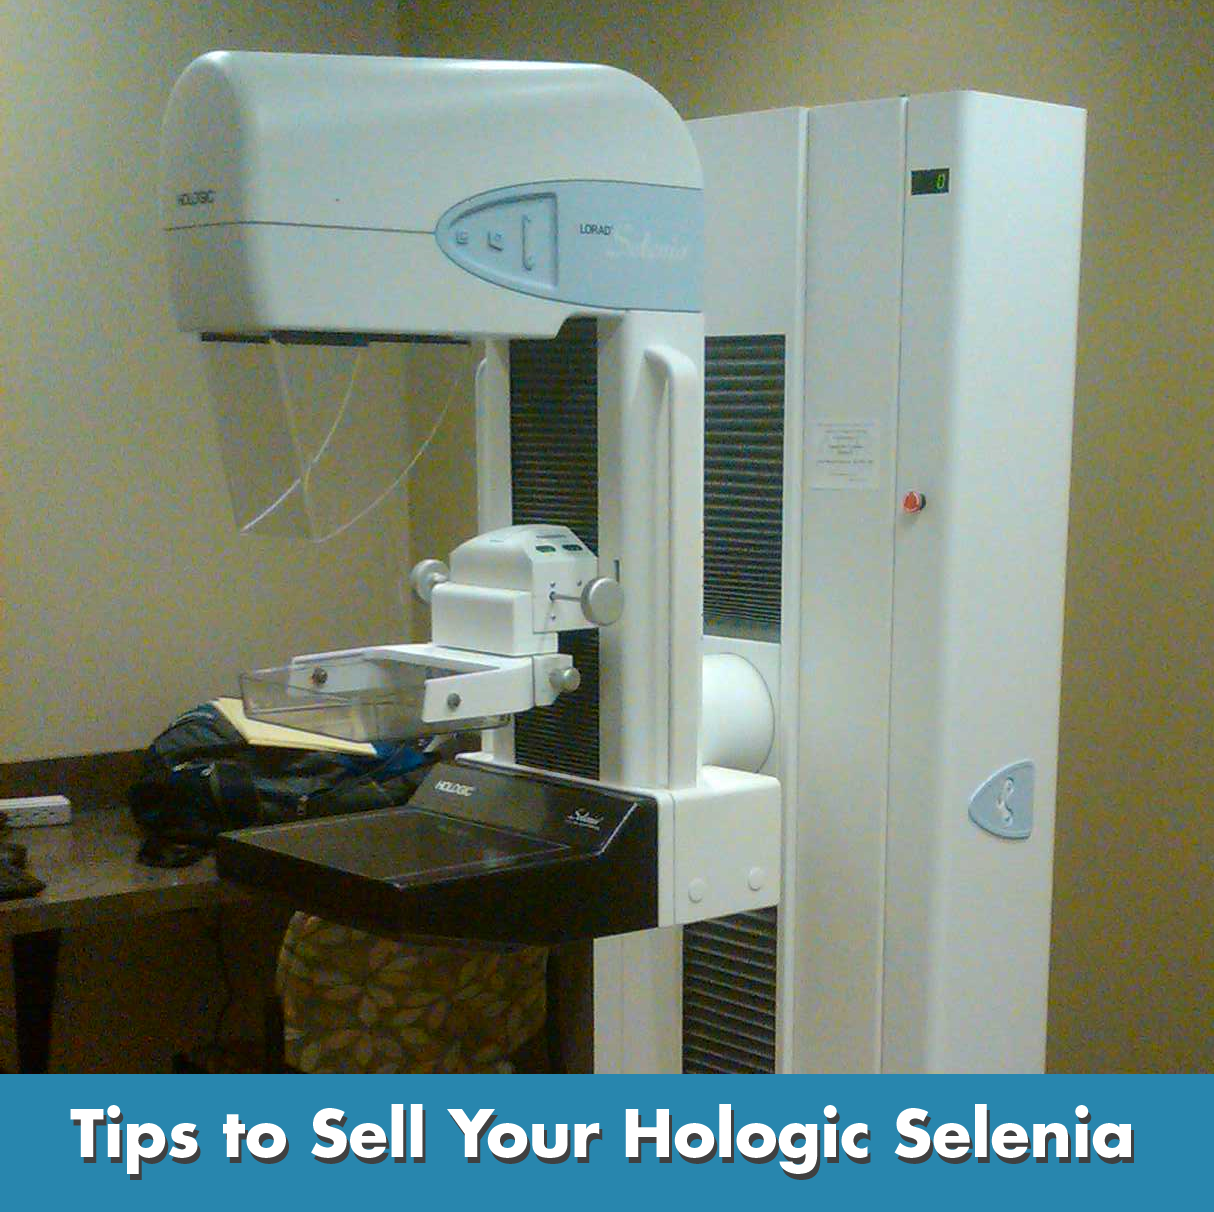 Selling Your Hologic Selenia Digital Mammography System